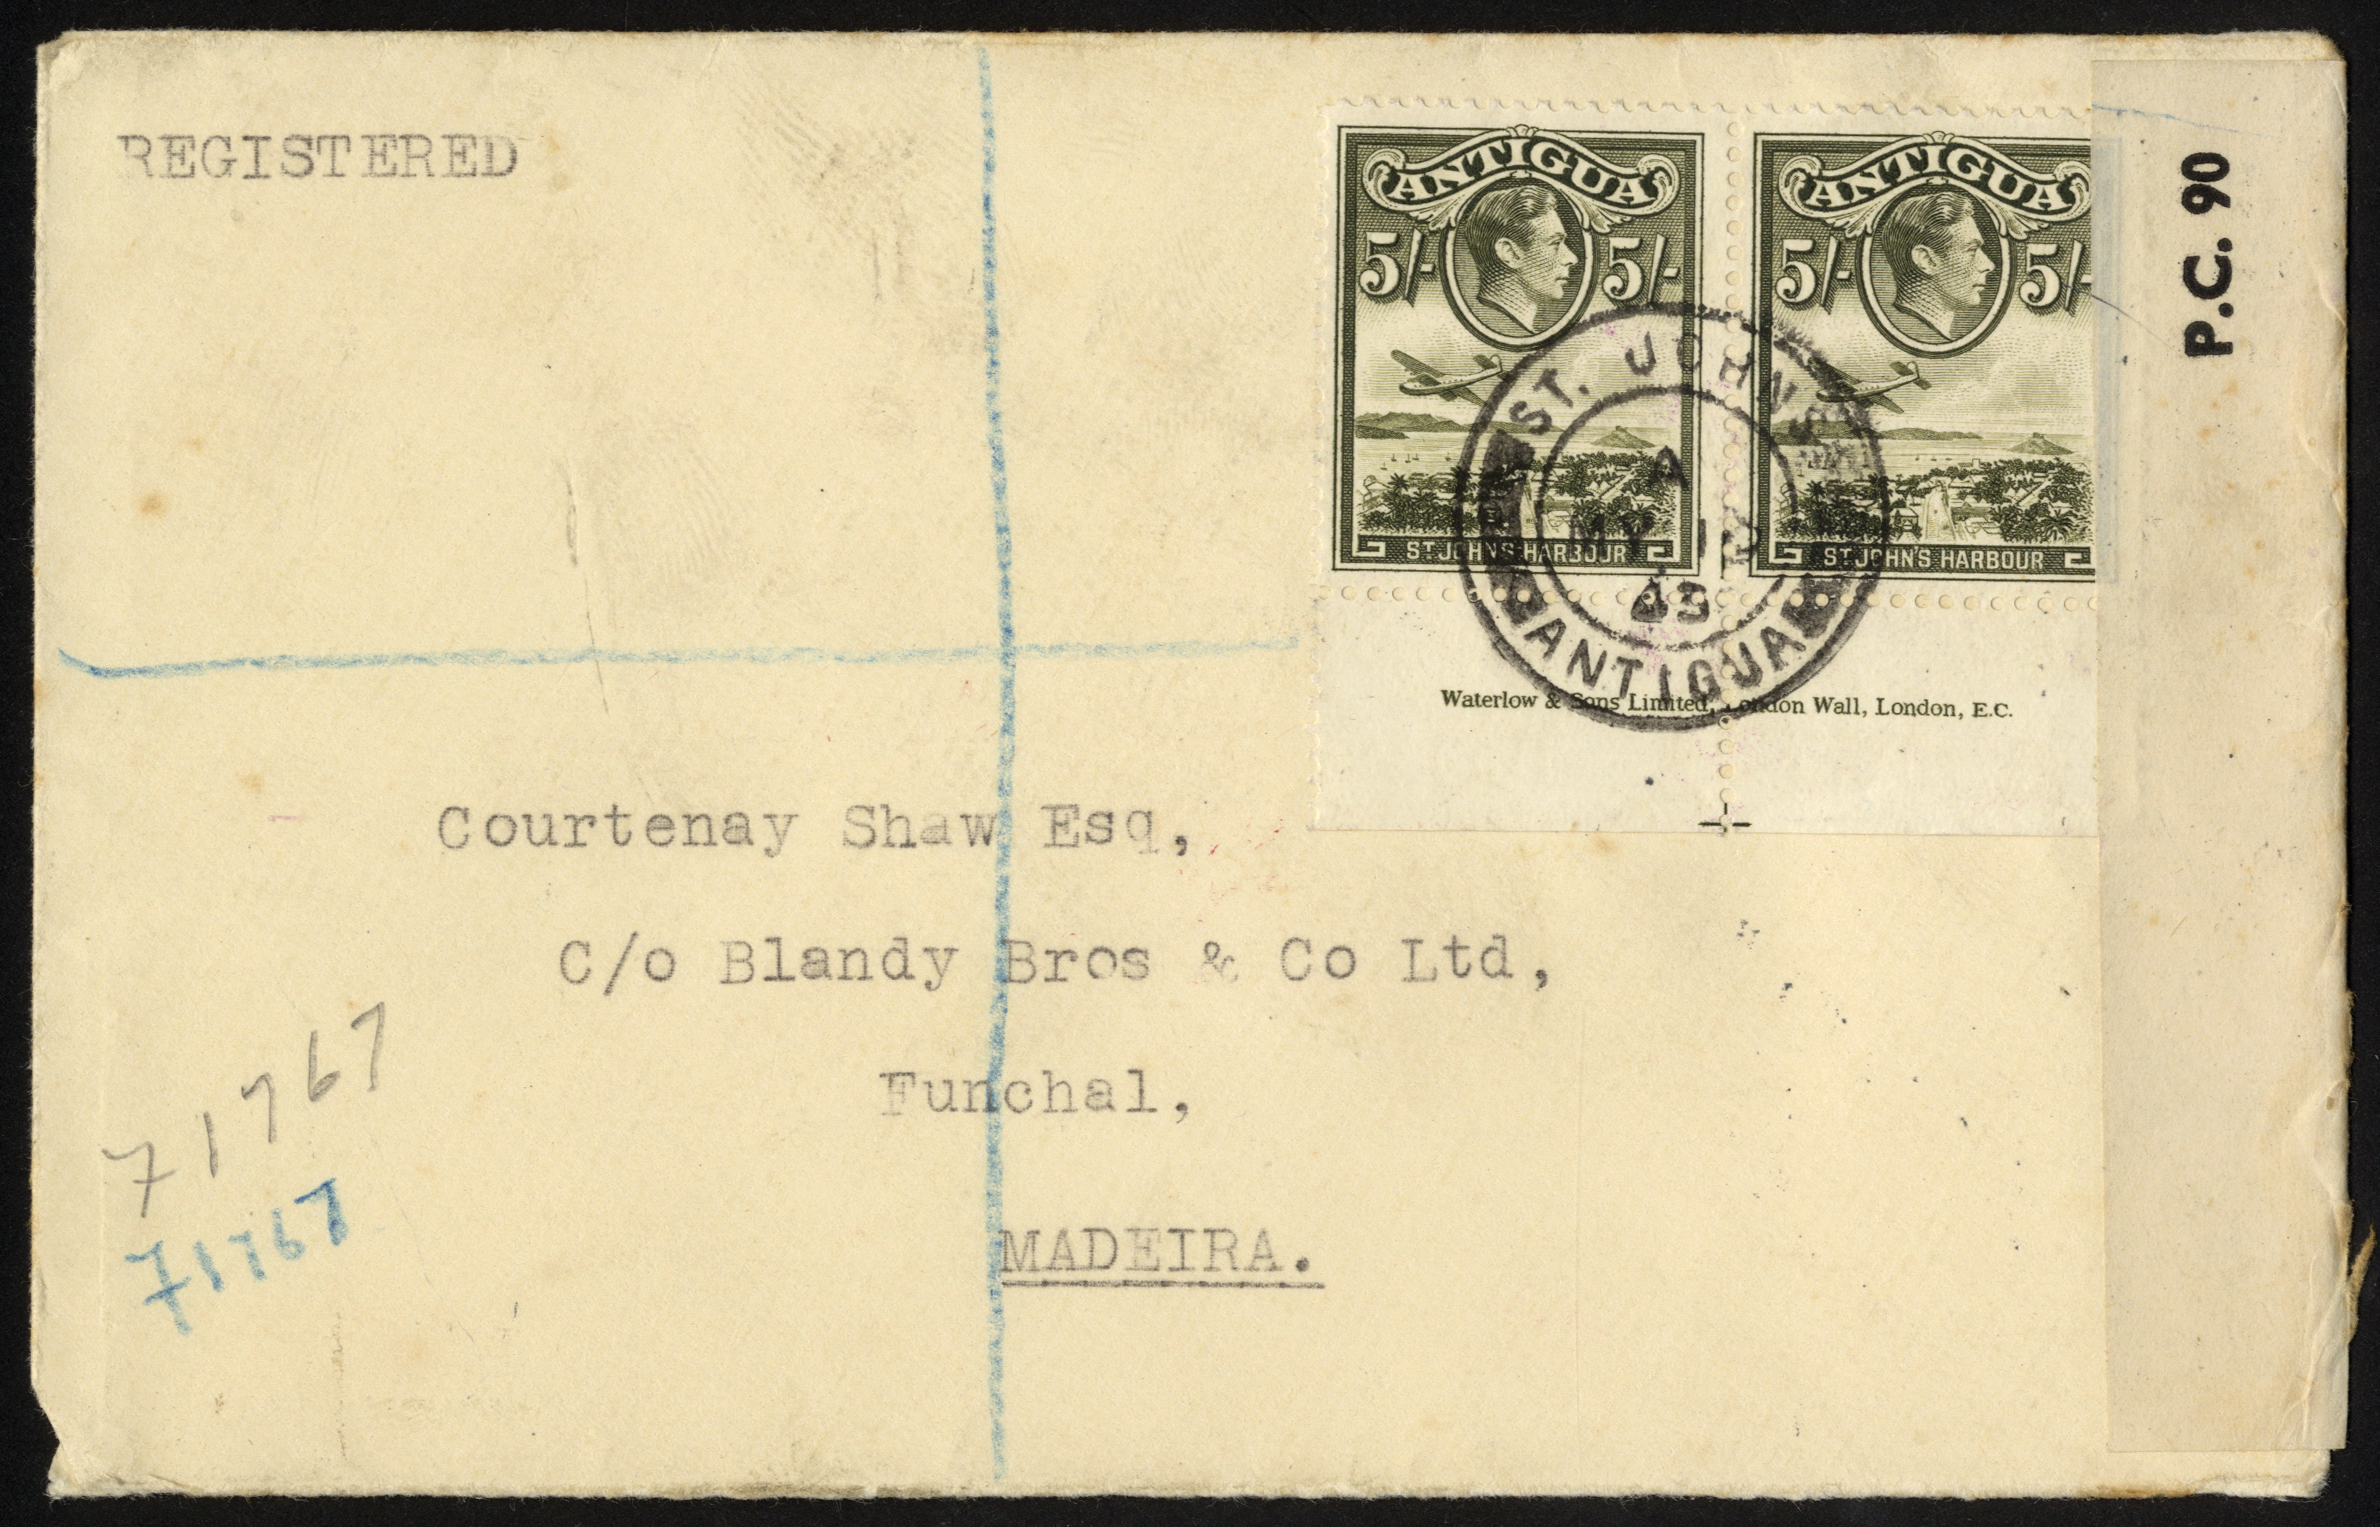 Antigua. 1943 three censored covers to Madeira, one with single 5/-; the other two with 2/6d imprint